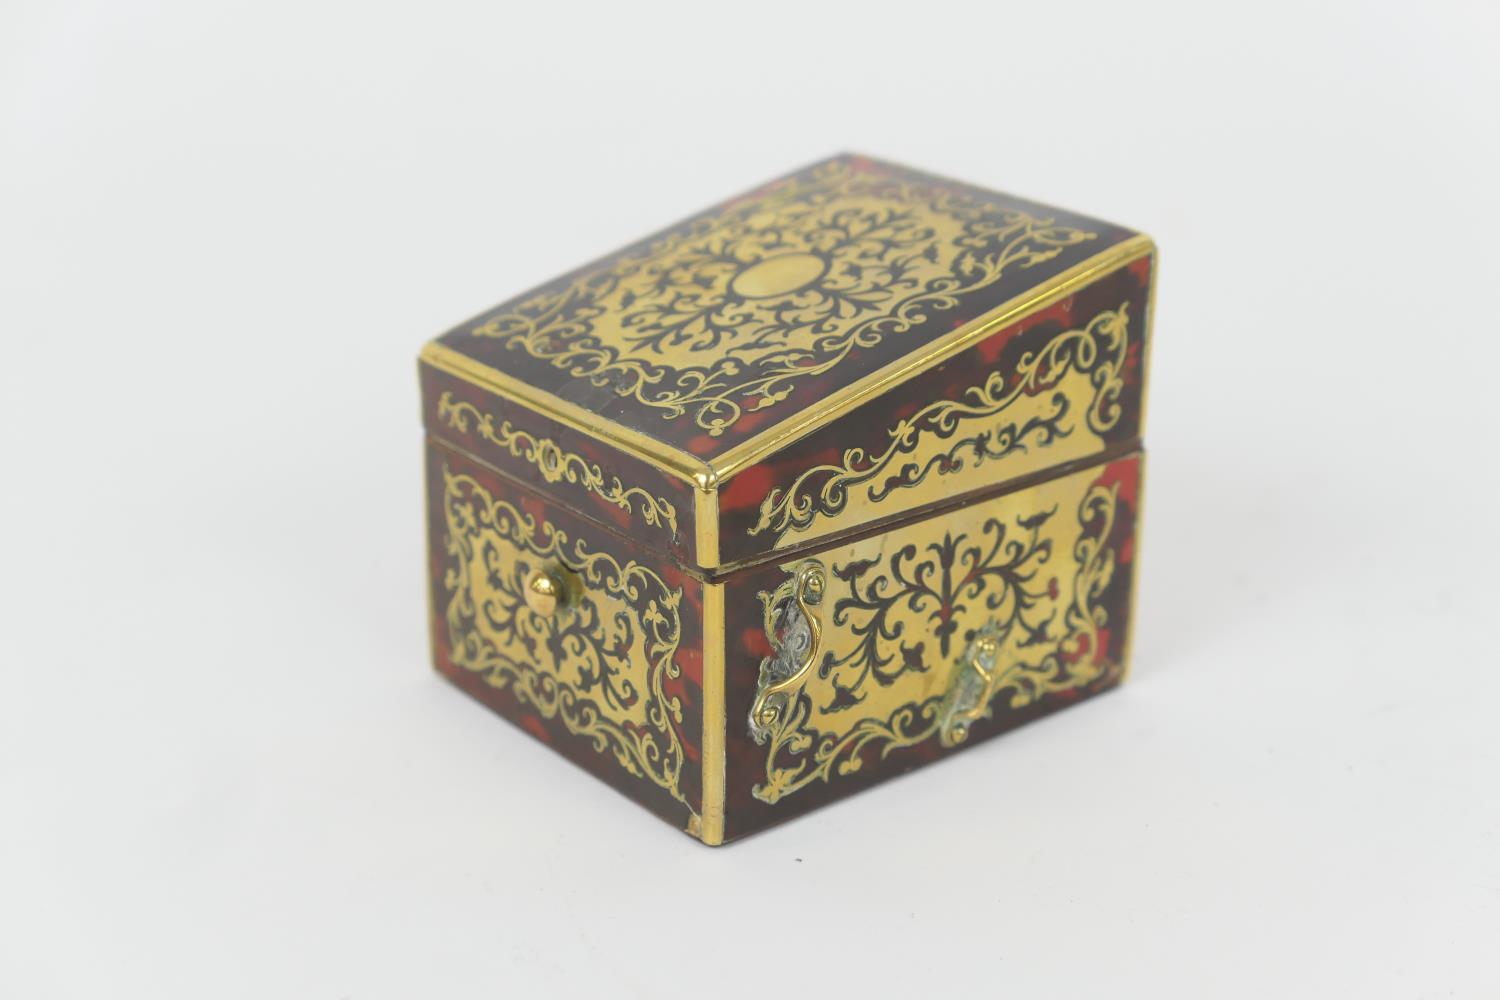 Asprey & Co., London, boulle box, late 19th Century, possibly for string, having a sloping front and